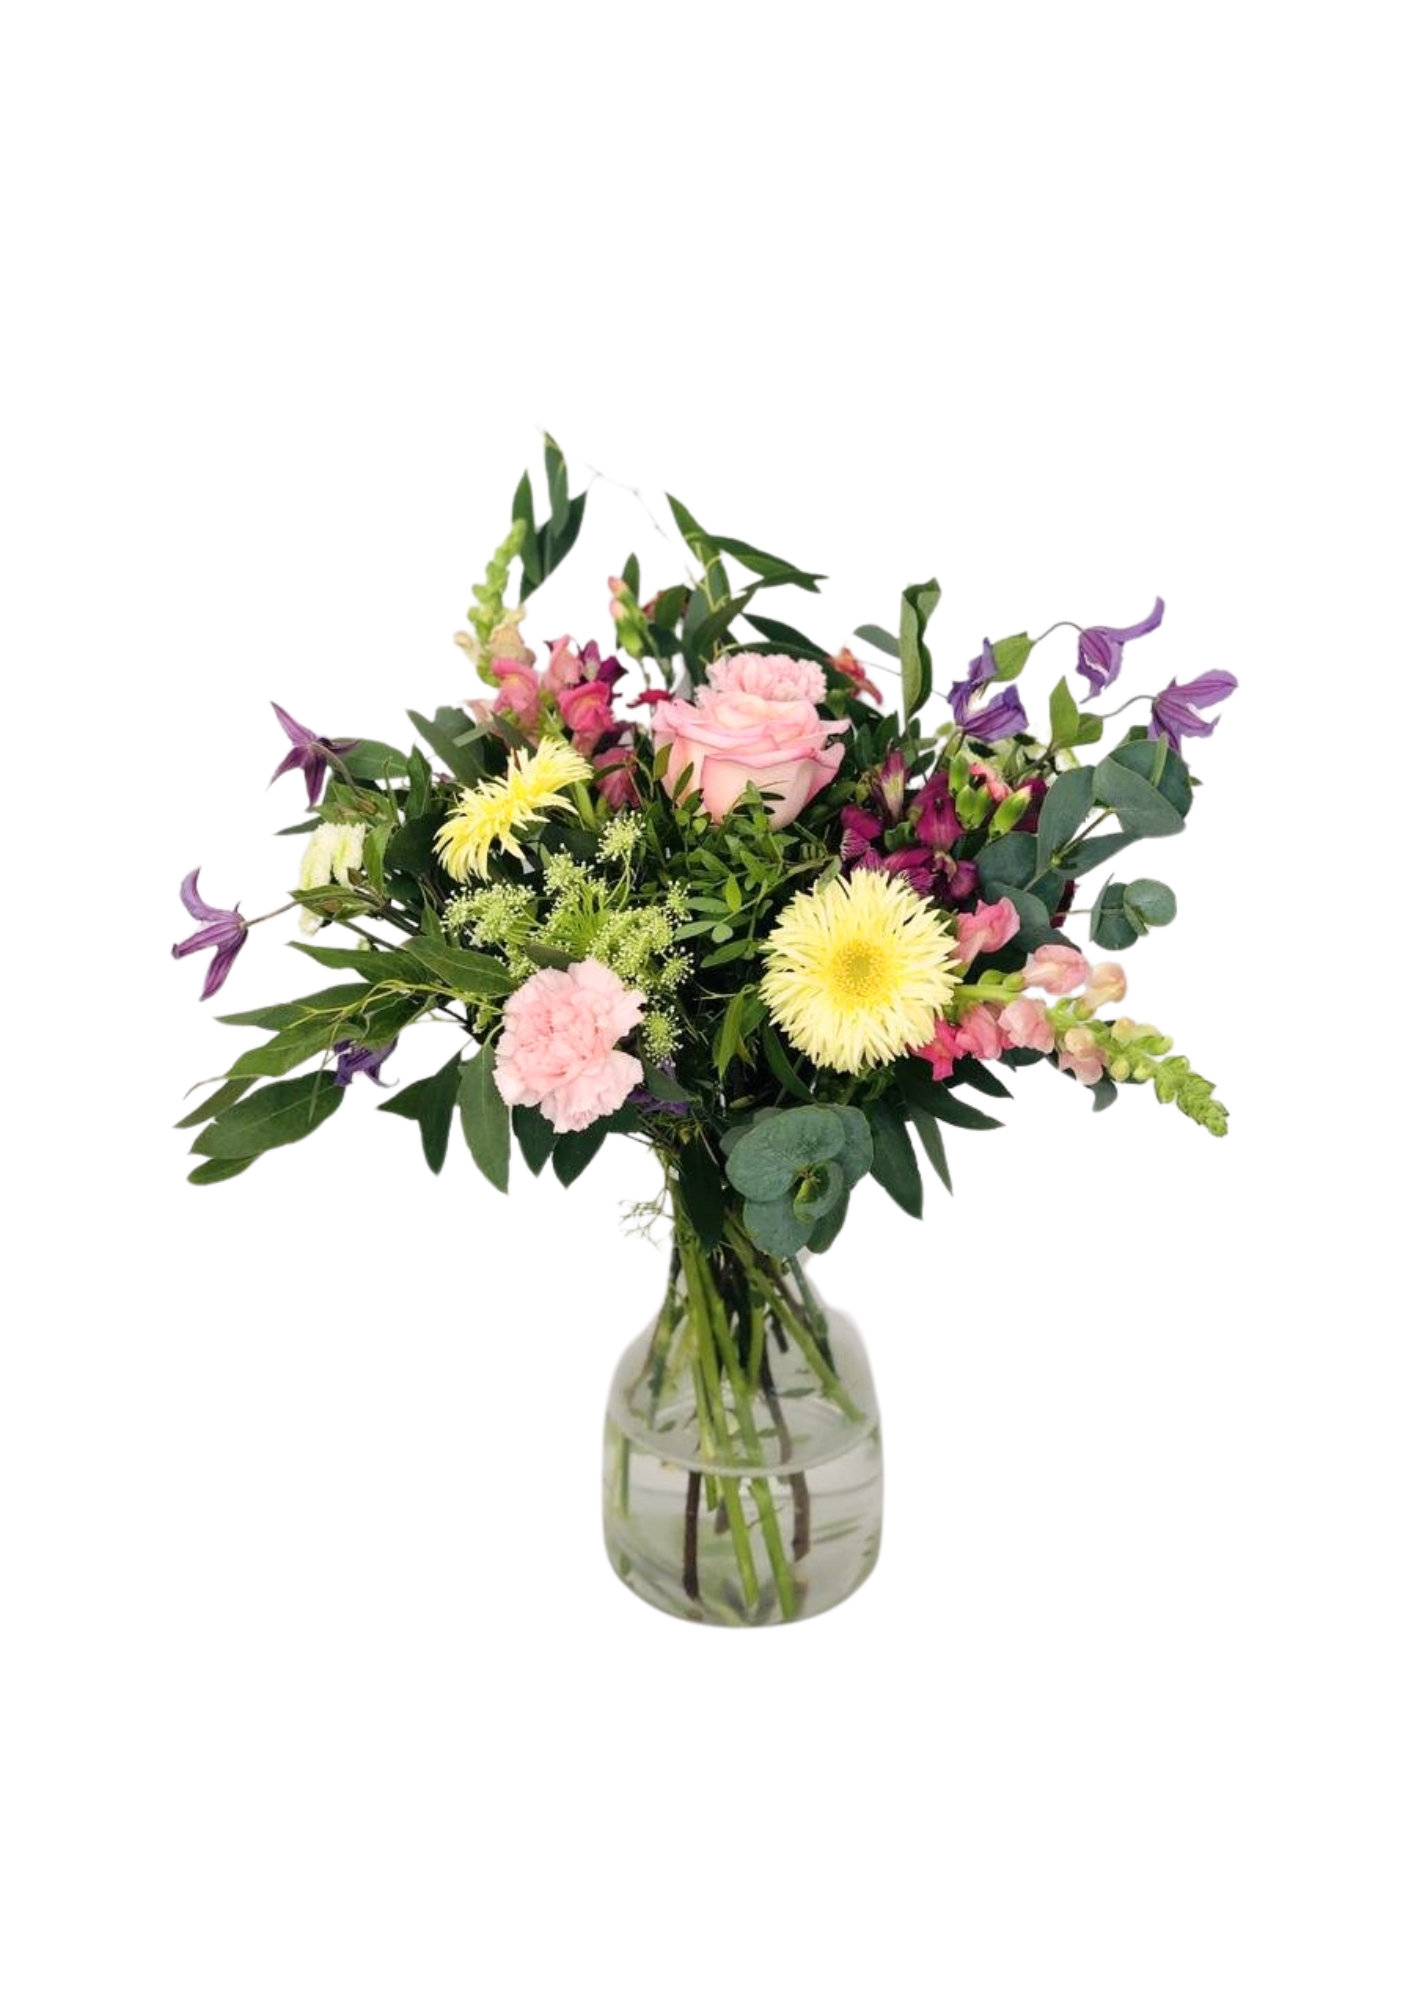 <h2>Beautiful Flowers in Vase | Summer Flowers</h2>
<br>
<ul>
<li>Approximate Dimensions: 30cm x 40cm</li>
<li>Flowers arranged by hand into a glass vase and finished off with a hidden wooden ladybird</li>
<li>To give you the best occasionally we may make substitutes</li>
<li>Our flowers backed by our 7 days freshness guarantee</li>
<li>For delivery area coverage see below</li>
</ul>
<br>
<h2>Flower Delivery Coverage</h2>
<p>Our shop delivers flowers to the following Liverpool postcodes L1 L2 L3 L4 L5 L6 L7 L8 L11 L12 L13 L14 L15 L16 L17 L18 L19 L24 L25 L26 L27 L36 L70 If your order is for an area outside of these we can organise delivery for you through our network of florists. We will ask them to make as close as possible to the image but because of the difference in stock and sundry items, it may not be exact.</p>
<br>
<h2>Vase of Flowers| Flowers delivered in water</h2>
<p>These beautiful flowers hand-arranged by our professional florists into a glass vase are a delightful choice from our new collection. This bouquet of summer favourites would make the perfect gift to let someone know you are thinking of them.</p>
<br>
<p>A bouquet arranged into a vase is a lovely display of fresh flowers that have the wow factor. The advantage of having a bouquet made this way is that they are artfully arranged by our florists and tied so that they stay in the vase.</p>
<br>
<p>At no point are the flowers out of water. This means they look their very best on the day they arrive and continue to delight for days after.</p>
<br>
<p>Being delivered in a vase means the recipient does not need to find a suitable vase, they can just put them down and enjoy.</p>
<br>
<p>Featuring 3 Pink Roses, 3 Gold Panicum, 1 Sweet Rocket, 3 Veronica, 3 Pink Carnations, 1 Limonium, 1 Ammi, 3 Yellow/White alstroemeria, 3 Green Chrysanthemum, and 1 Penny Cress together with mixed seasonal foliage all hand-arranged into a beautiful vase.</p>
<br>
<h2>Eco-Friendly Liverpool Florists</h2>
<p>As florists we feel very close earth and want to protect it. Plastic waste is a huge problem in the florist industry so we made the decision to make our packaging eco-friendly.</p>
<p>To achieve this, we worked with our packaging supplier to remove the lamination off our boxes and wrap the tops in an Eco Flowerwrap, which means it easily compostable or can be fully recycled.</p>
<p>Once you've finished enjoying your flowers from us, they will go back into growing more flowers! Only a small amount of plastic is used as a water bubble and this is biodegradable.</p>
<p>Even the sachet of flower food included with your bouquet is compostable.</p>
<p>All our bouquets have small wooden ladybird hidden amongst them, so do not forget to spot the ladybird and post a picture on our social media pages to enter our rolling competition.</p>
<br>
<h2>Flowers Guaranteed for 7 Days</h2>
<p>Our 7-day freshness guarantee should give you confidence that we will only send out good quality flowers.</p>
<p>Leave it in our hands we will create a marvellous bouquet which will not only look good on arrival but will continue to delight as the flowers bloom.</p>
<br>
<h2>Liverpool Flower Delivery</h2>
<p>We are open 7 days a week and offer advanced booking flower delivery, same-day flower delivery, 3-hour flower delivery. Guaranteed AM PM or Evening Flower Delivery and also offer Sunday Flower Delivery.</p>
<p>Our florists deliver in Liverpool and can provide flowers for you in Liverpool, Merseyside. And through our network of florists can organise flower deliveries for you nationwide.</p>
<br>
<h2>The Best Florist in Liverpool, your local Liverpool Flower Shop</h2>
<p>Come to Booker Flowers and Gifts Liverpool for your beautiful flowers and plants. For that bit of extra luxury, we also offer a lovely range of finishing touches, such as wines, champagne, locally crafted Gin and Rum, vases, Scented Candles and Chocolates that can be delivered with your flowers.</p>
<p>To see the full range, see our extras section.</p>
<p>You can trust Booker Flowers and Gifts of delivery the very best for you.</p>
<p><br /><br /></p>
<p><em>5 Star review on Yell.com</em></p>
<br>
<p><em>Thank you Gemma for your fabulous service. The flowers are of the highest quality and delivered with a warm smile. My sister was delighted. Ordering was simple and the communications were top-notch. I will definitely use your services again.</em></p>